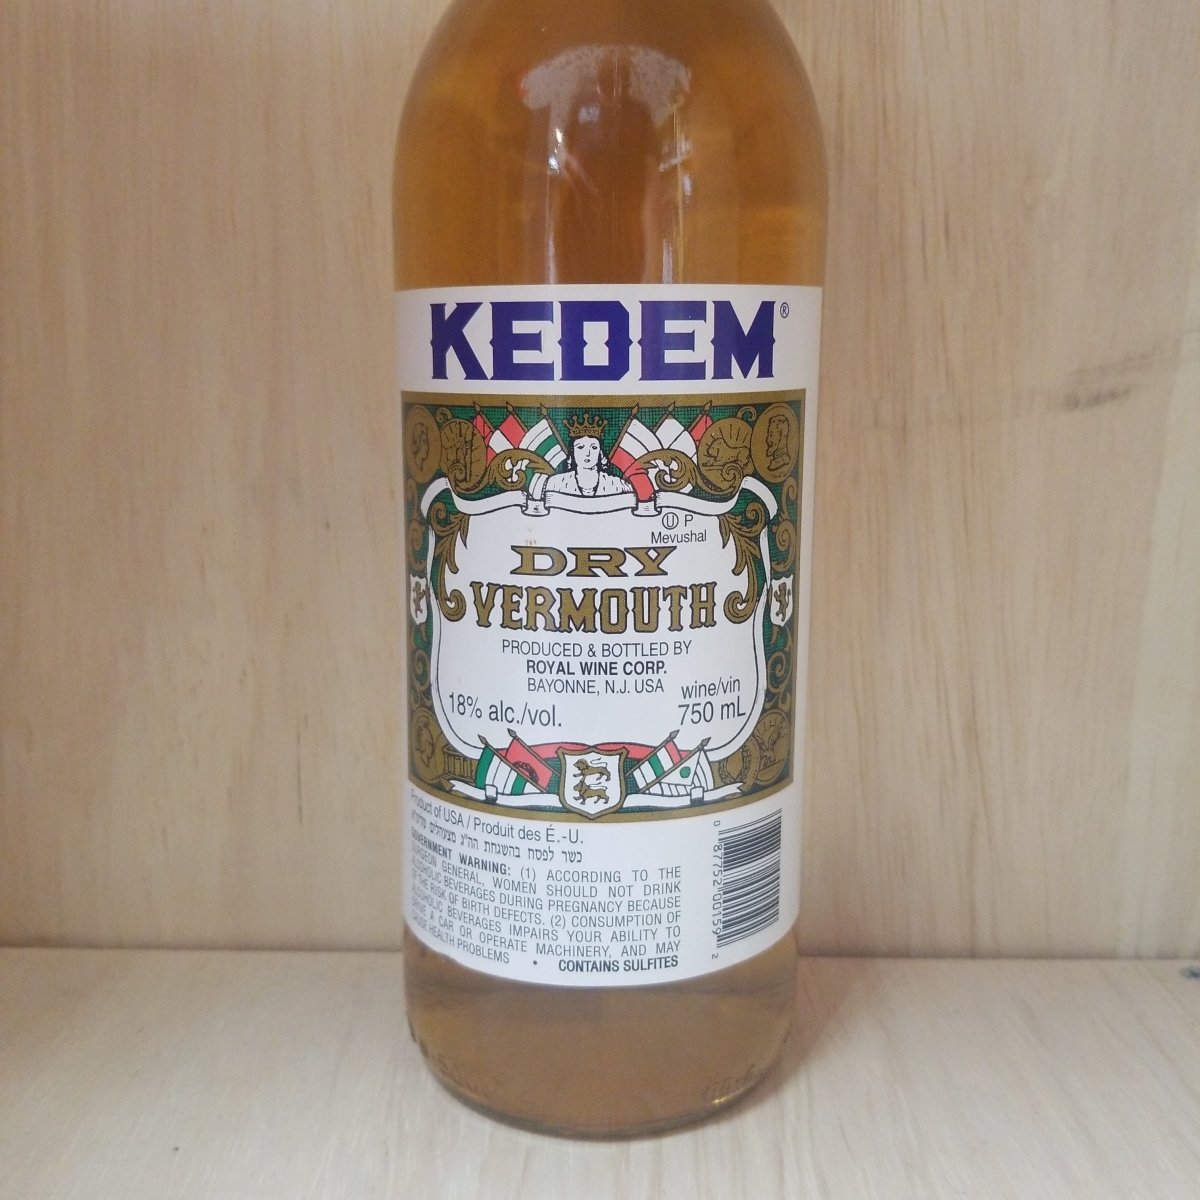 Kedem Dry Vermouth 750ml (Kosher for Passover/Mevushal) - Sip & Say